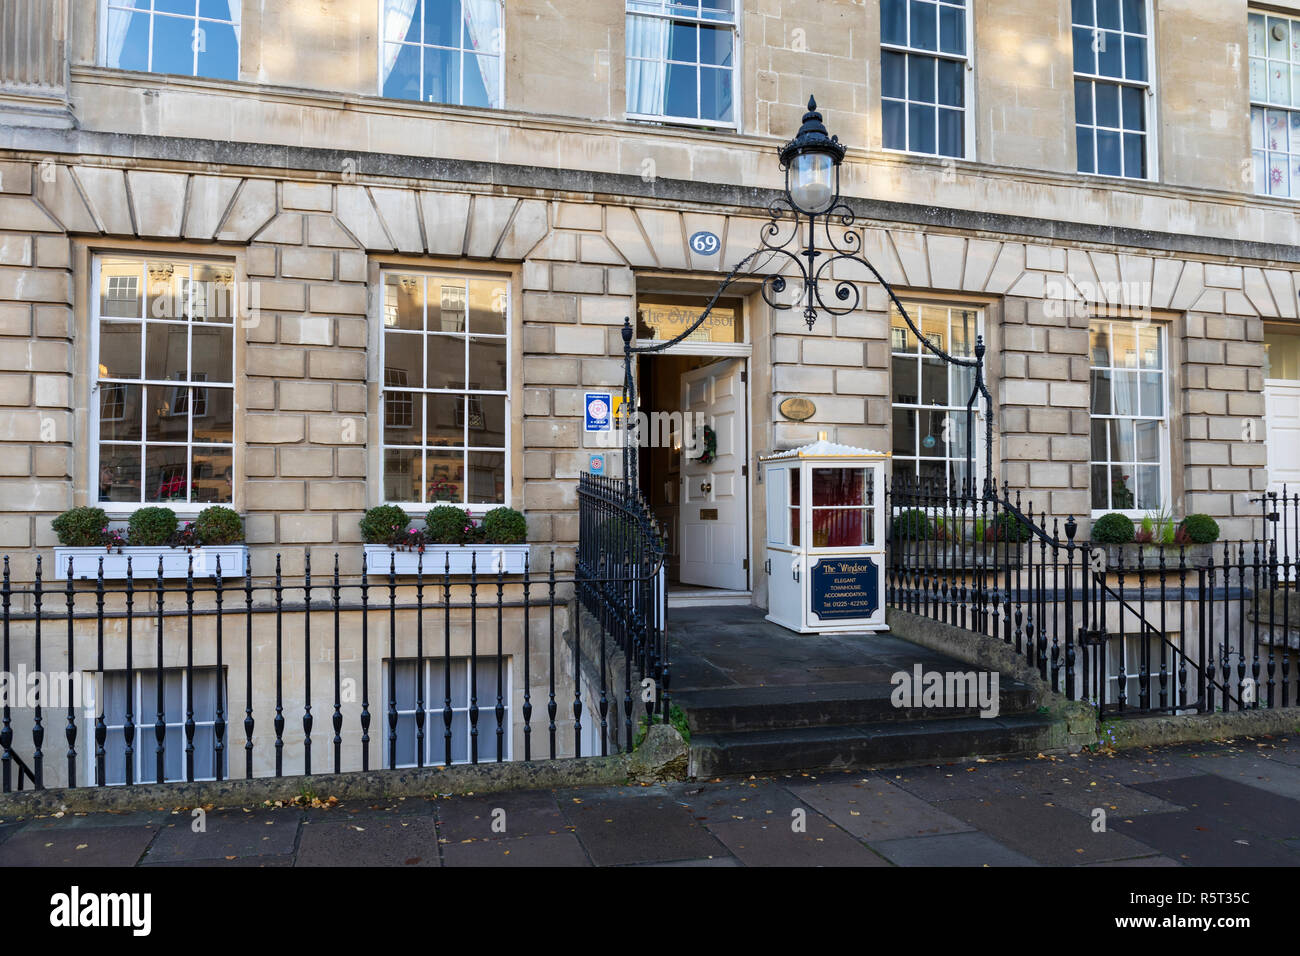 The Windsor Townhouse, Great Pulteney Street, Bath, England Stock Photo